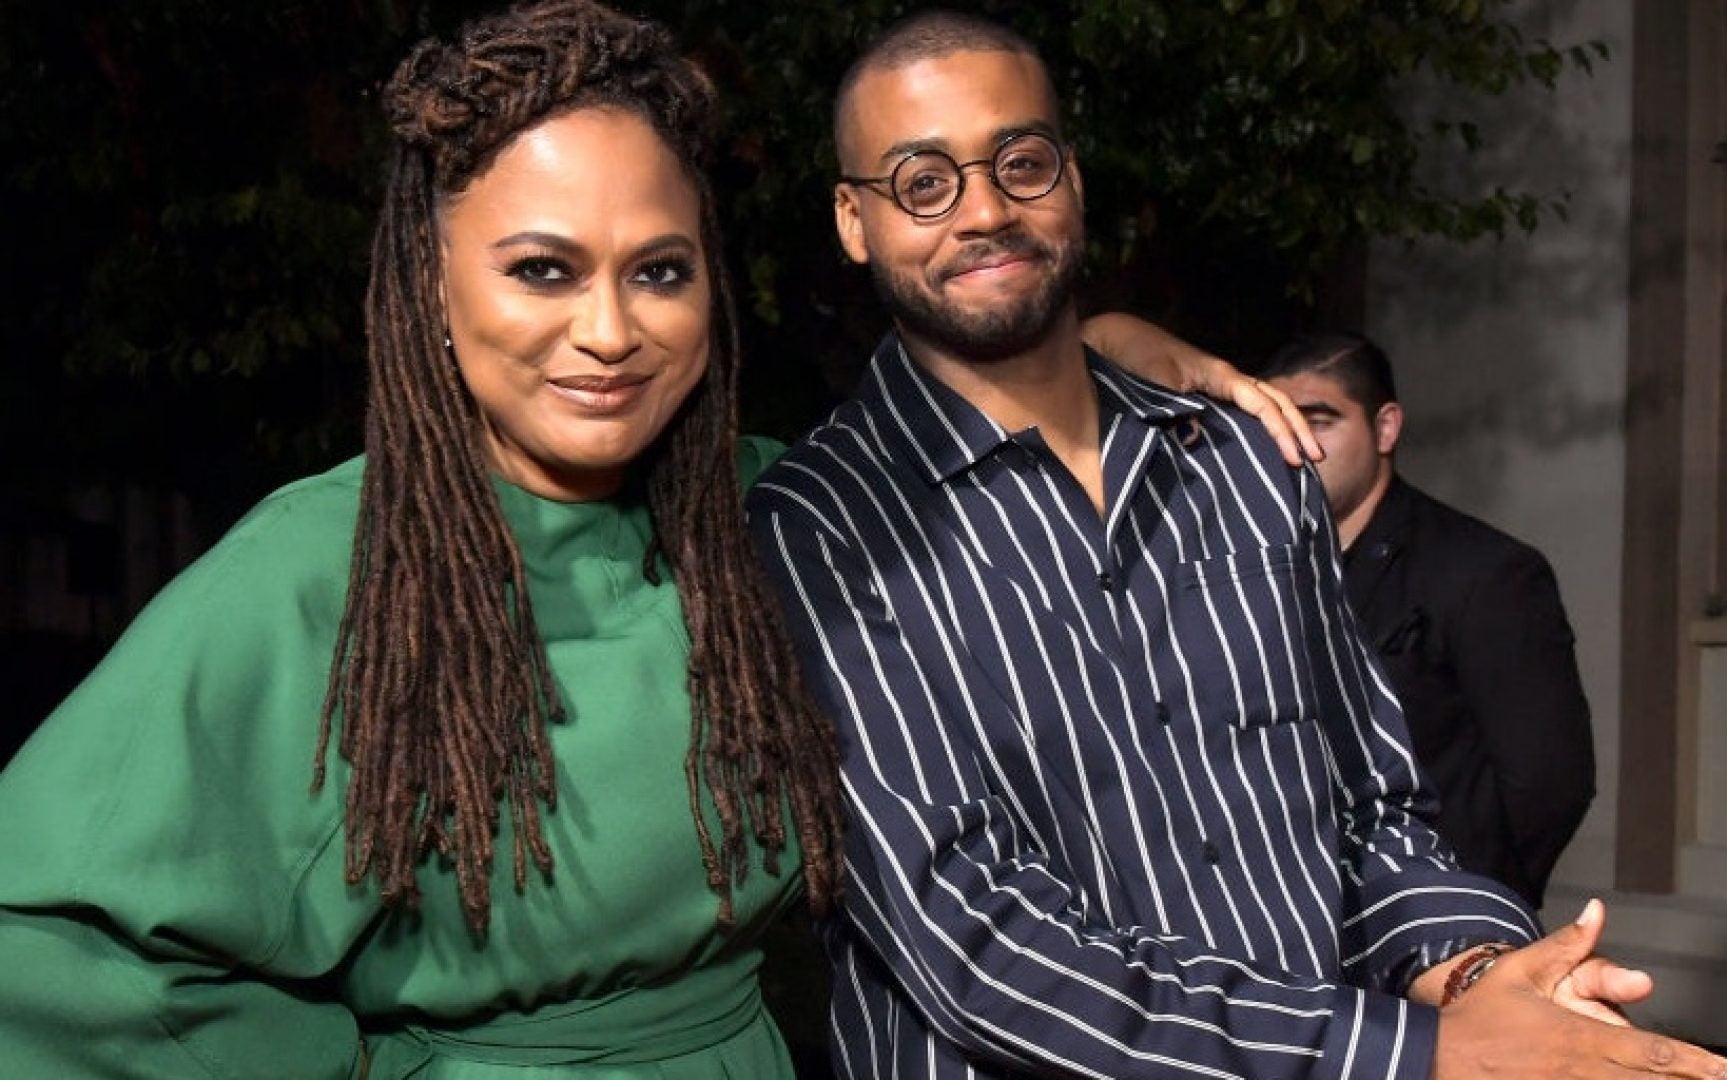 Ava DuVernay On Oscar-Nominated Composer Kris Bowers: ‘I Want Everything For Him’